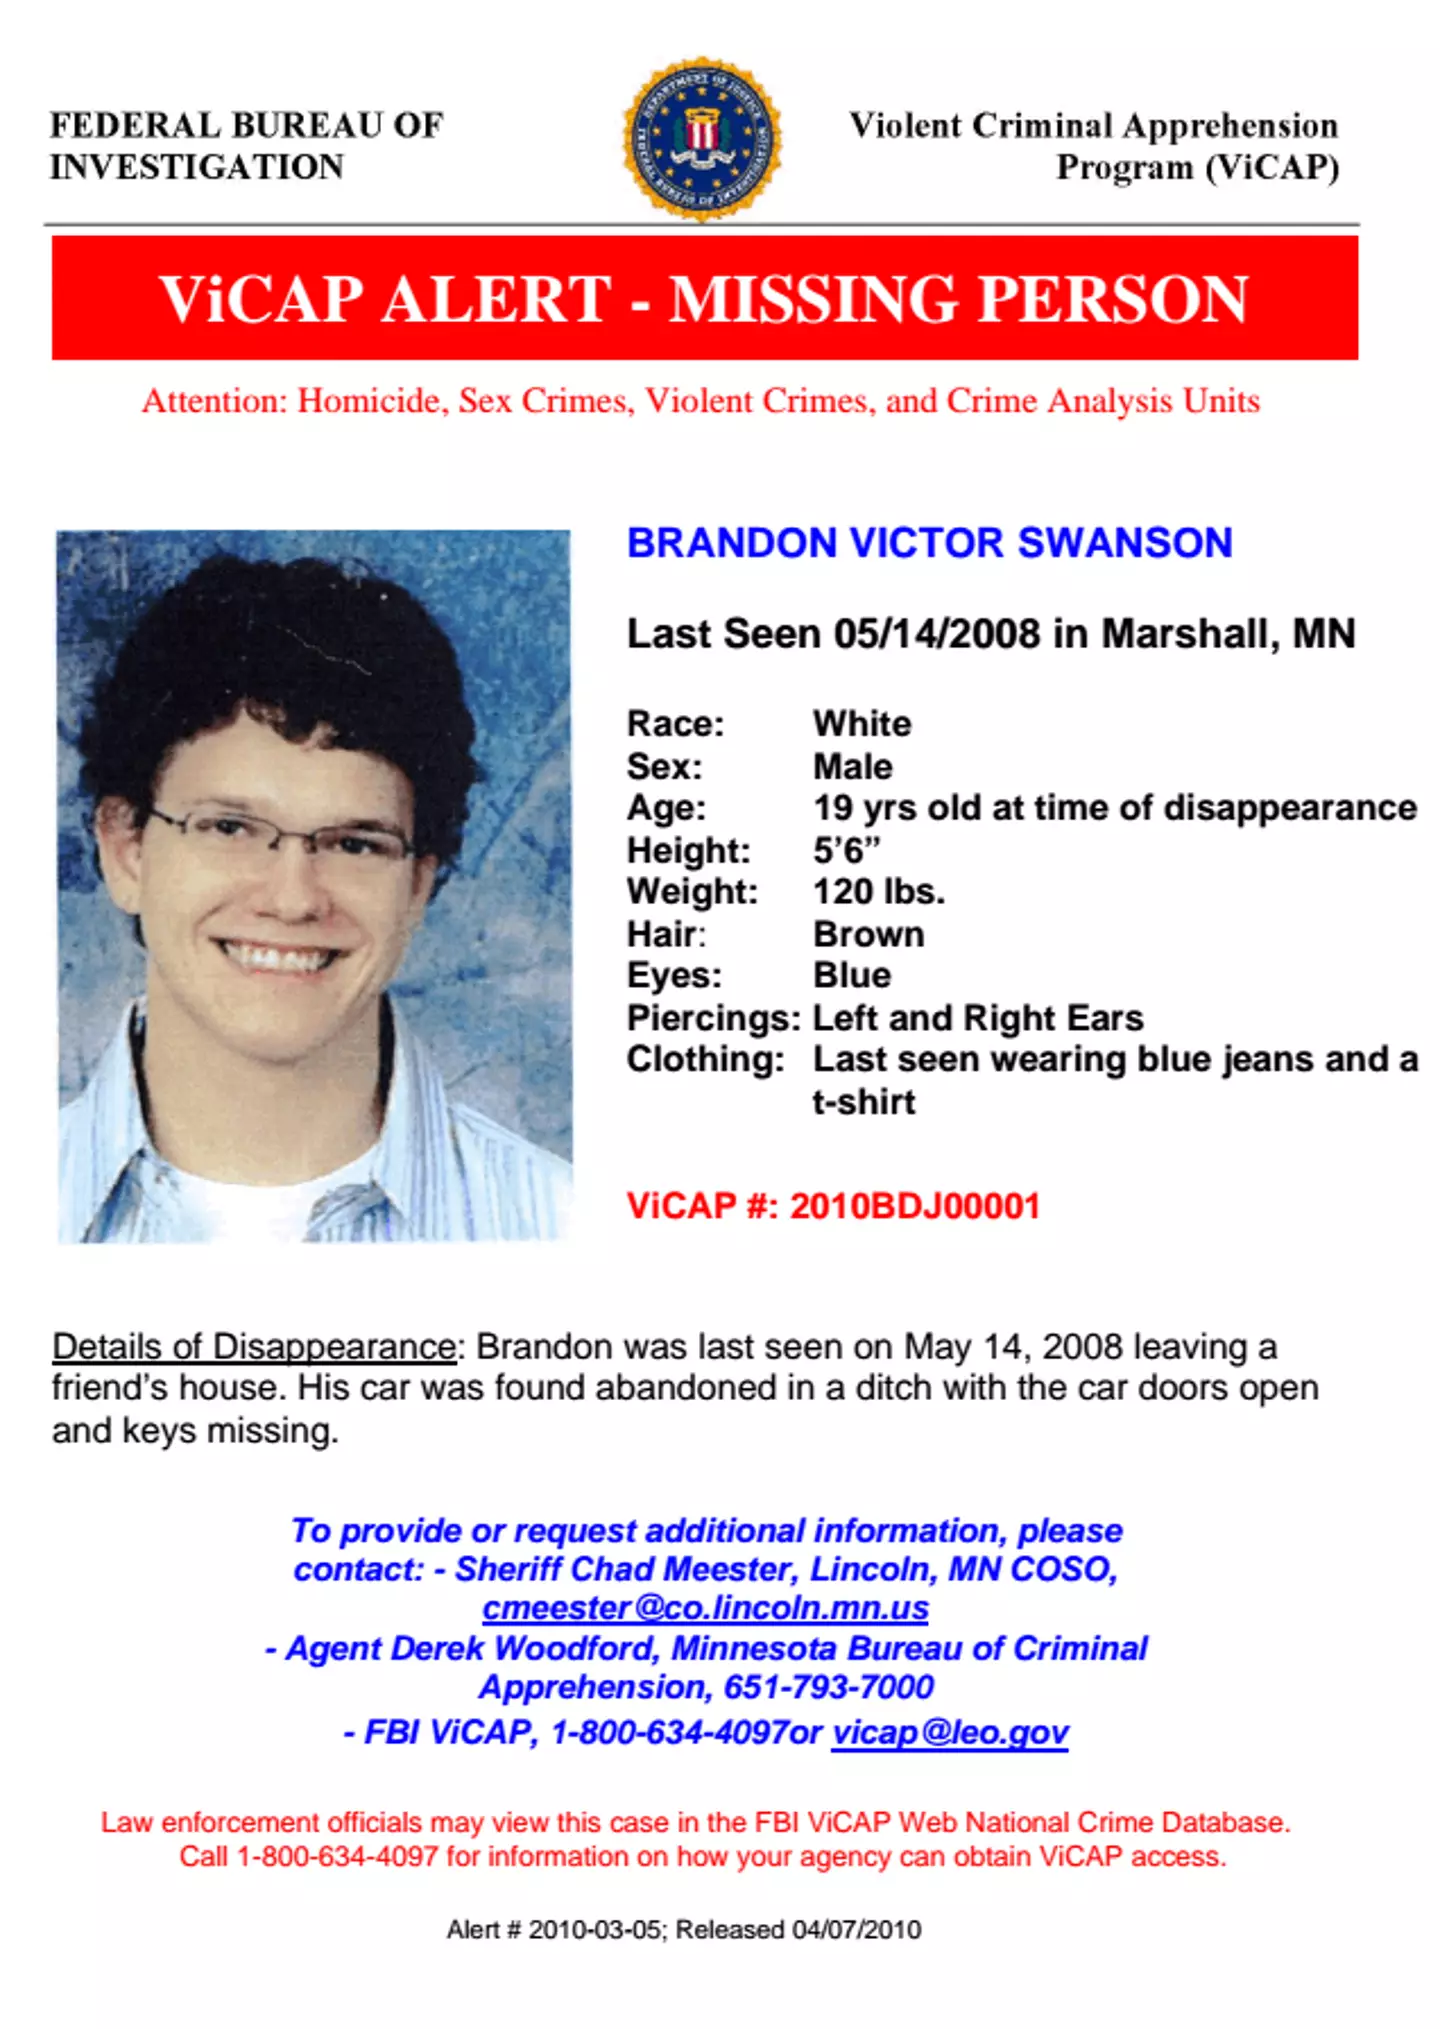 A search started for Brandon at 12:30pm.